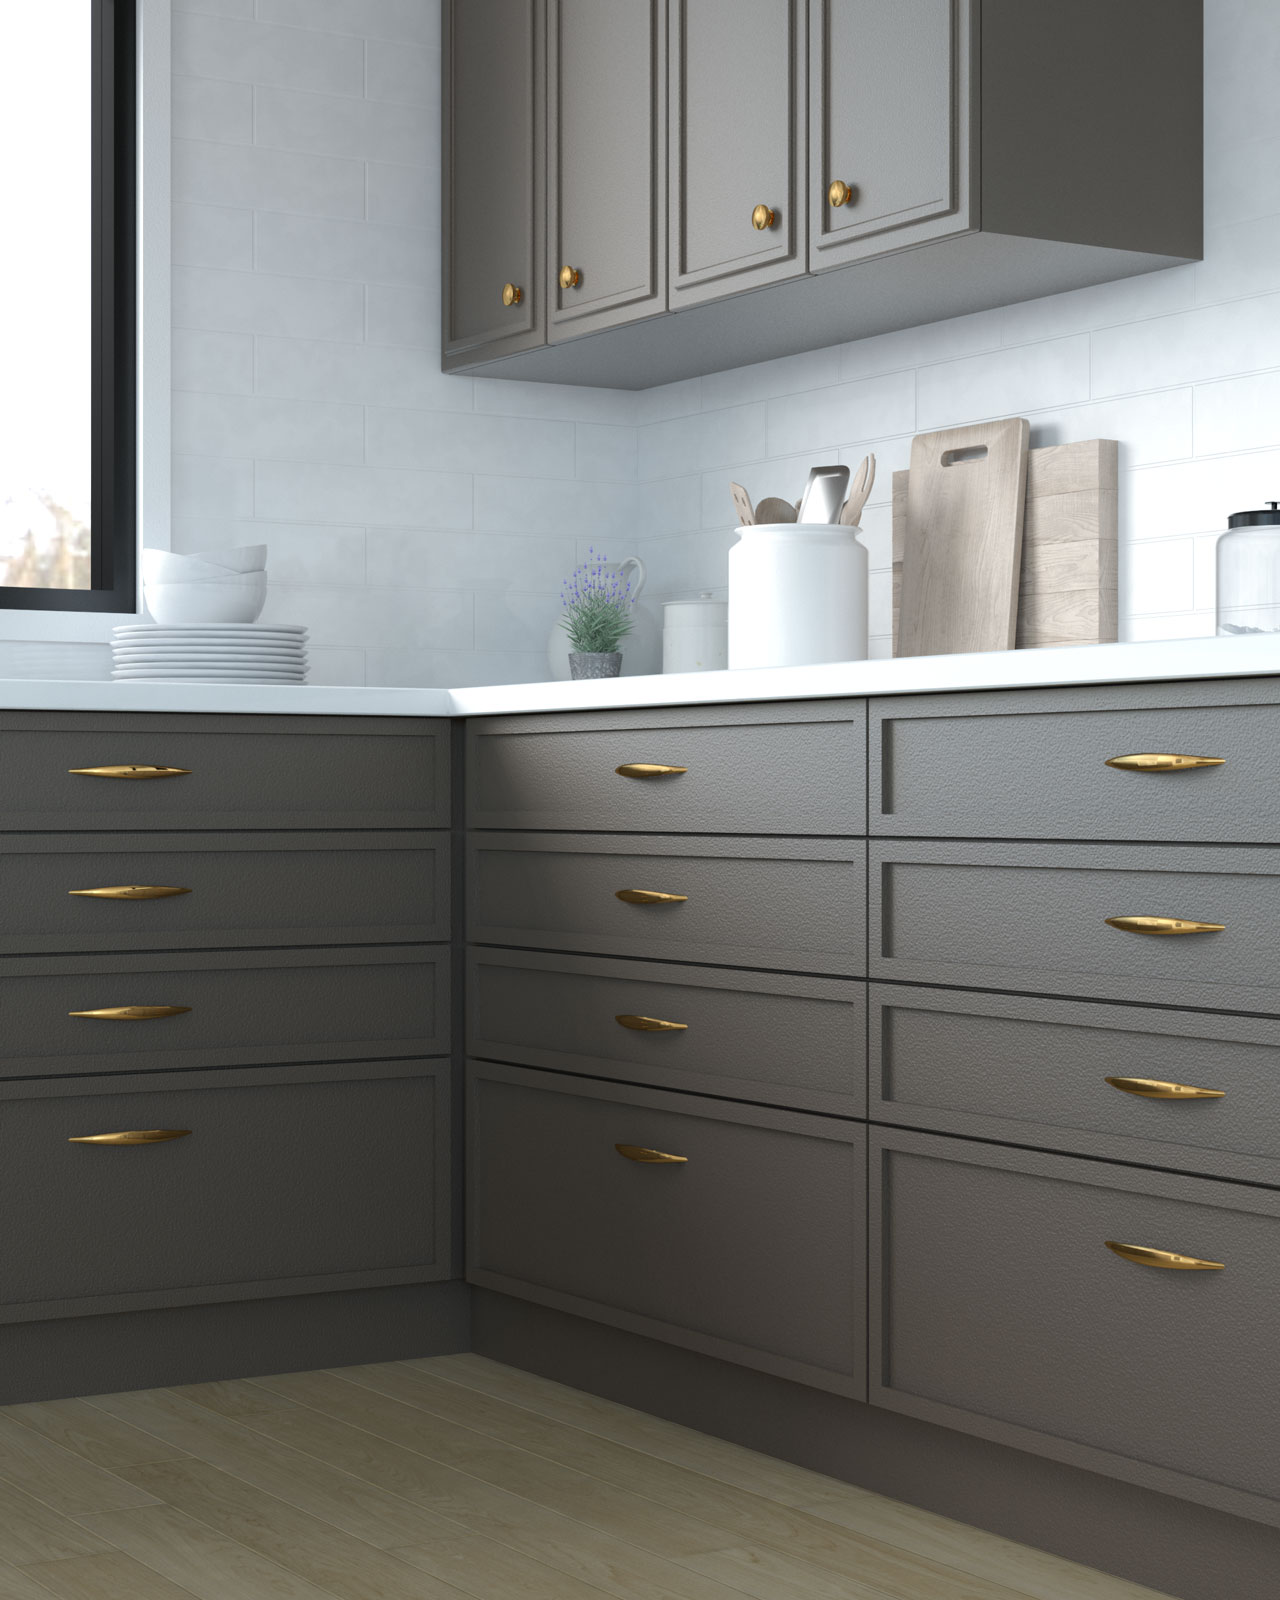 Brown cabinets with gold hardware